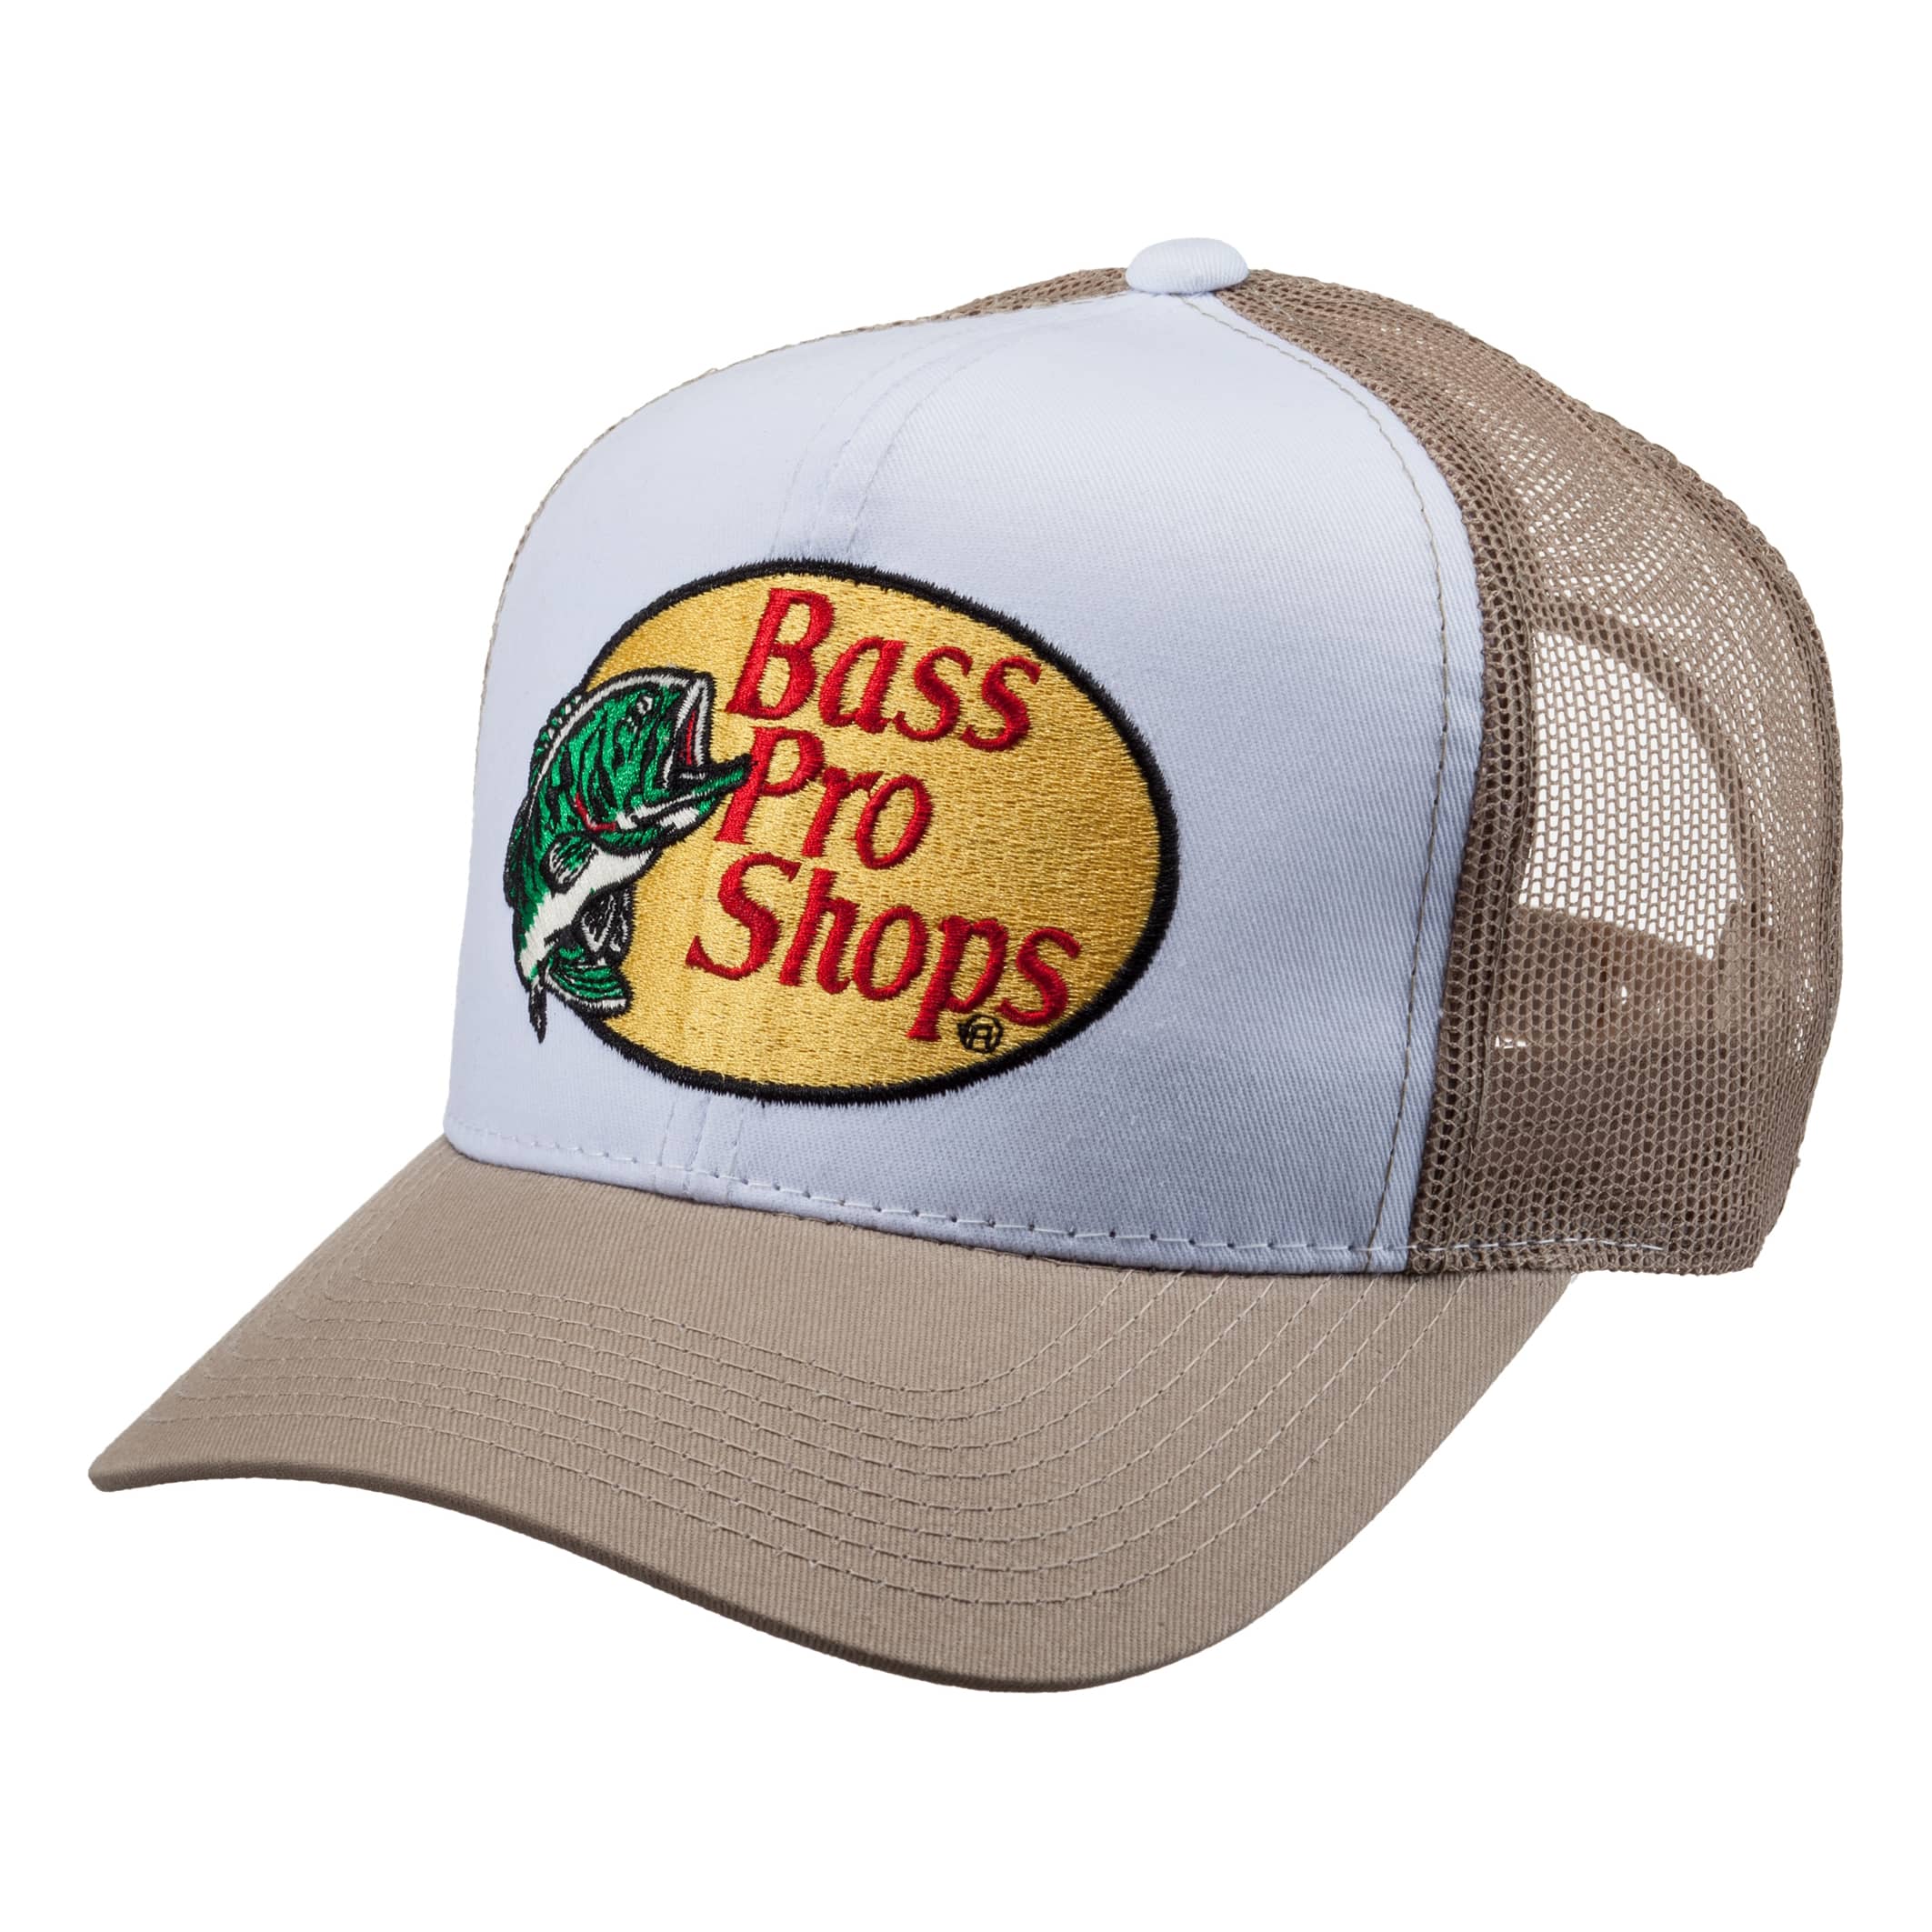 Bass Pro Shops® Embroidered Logo Mesh Caps - Tan